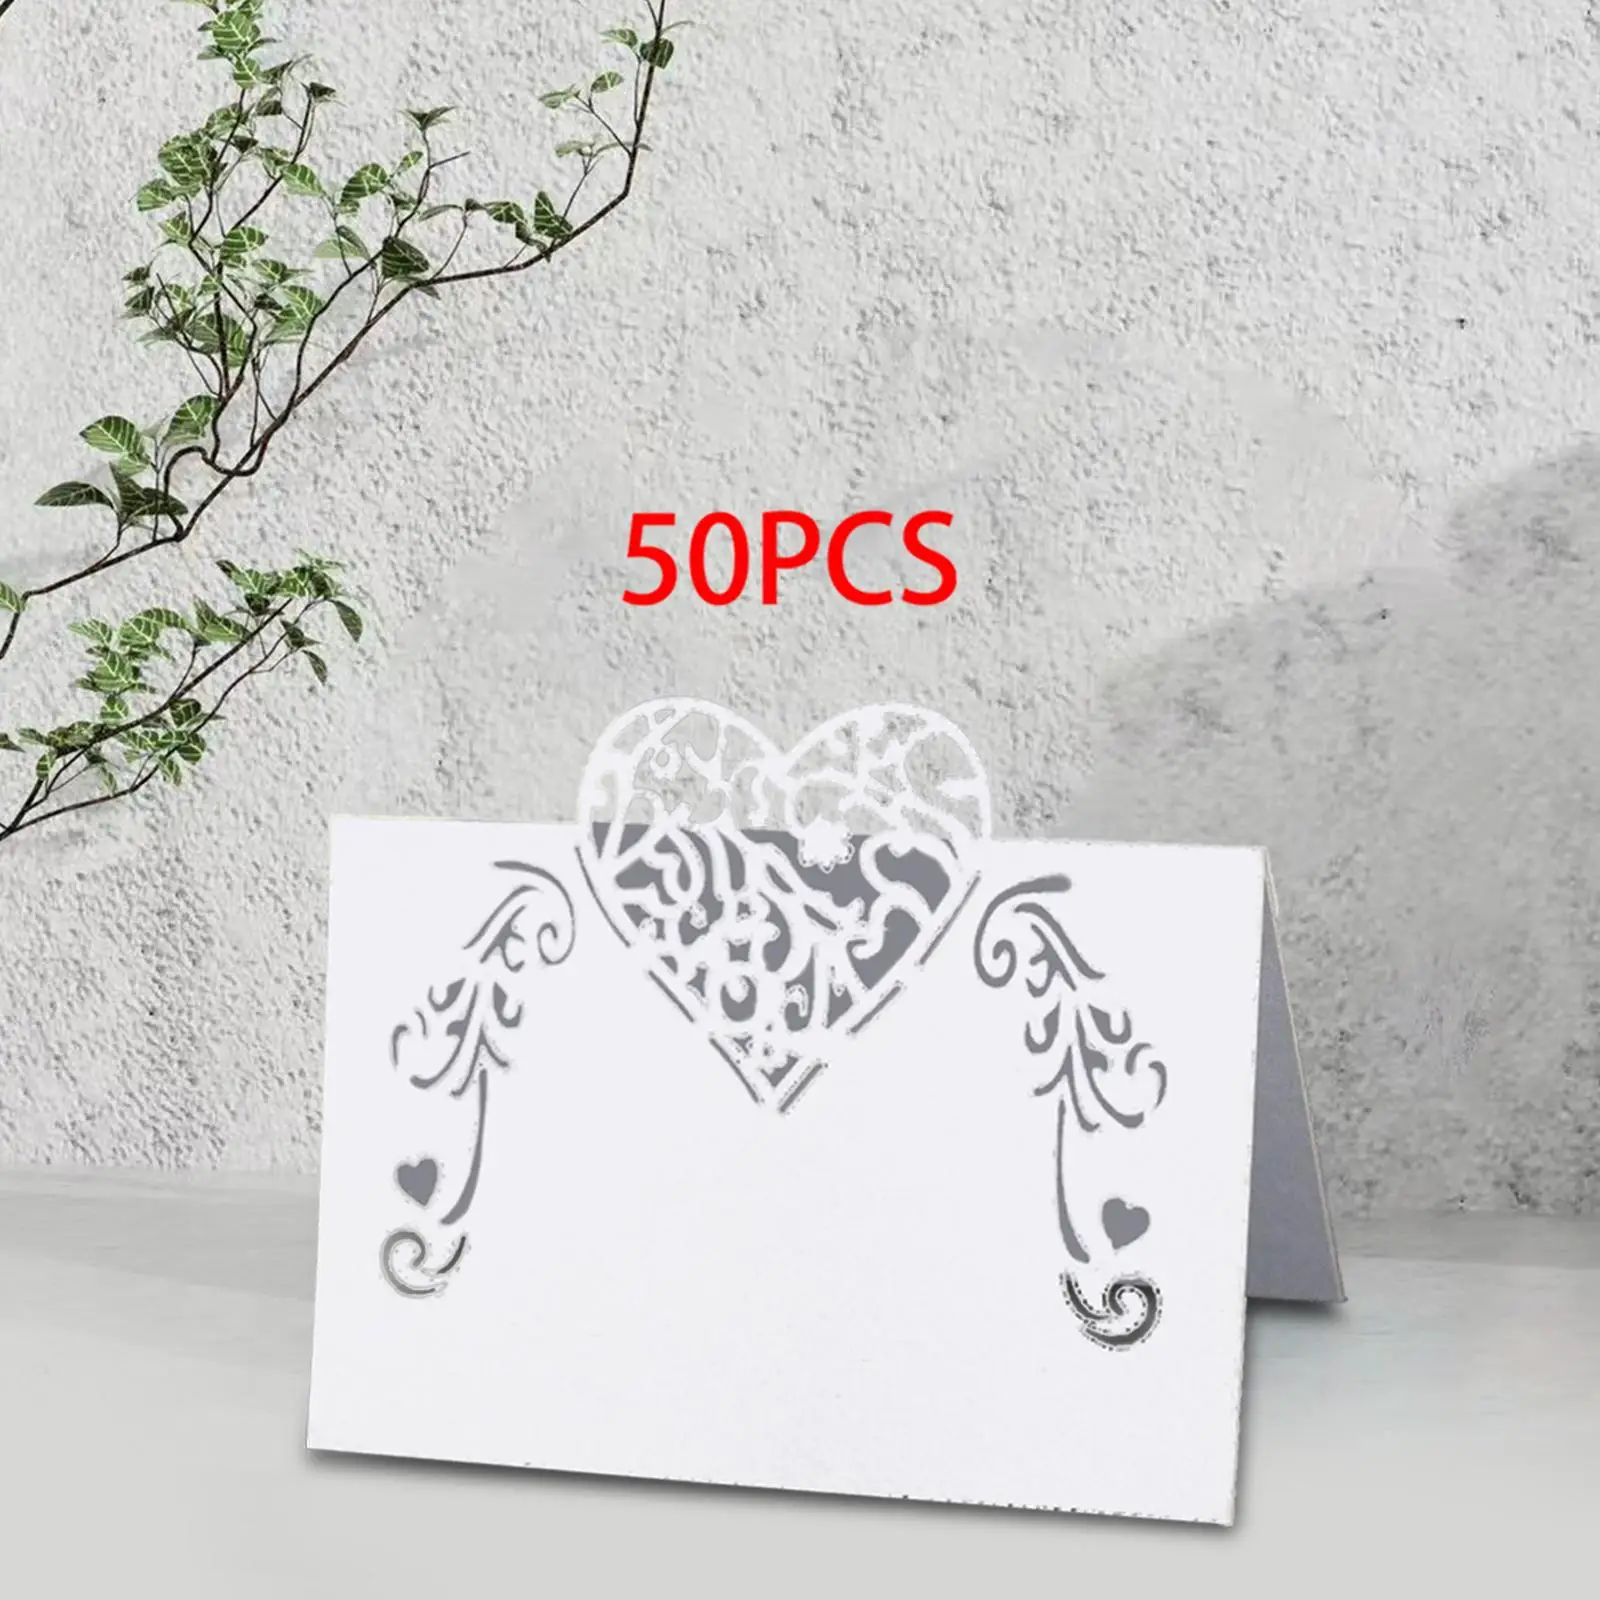 50Pcs Paper Place Cards Buffet Table Cards Tags Elegant Blank Greeting Cards for Reception Restaurant Restaurant Events Wedding